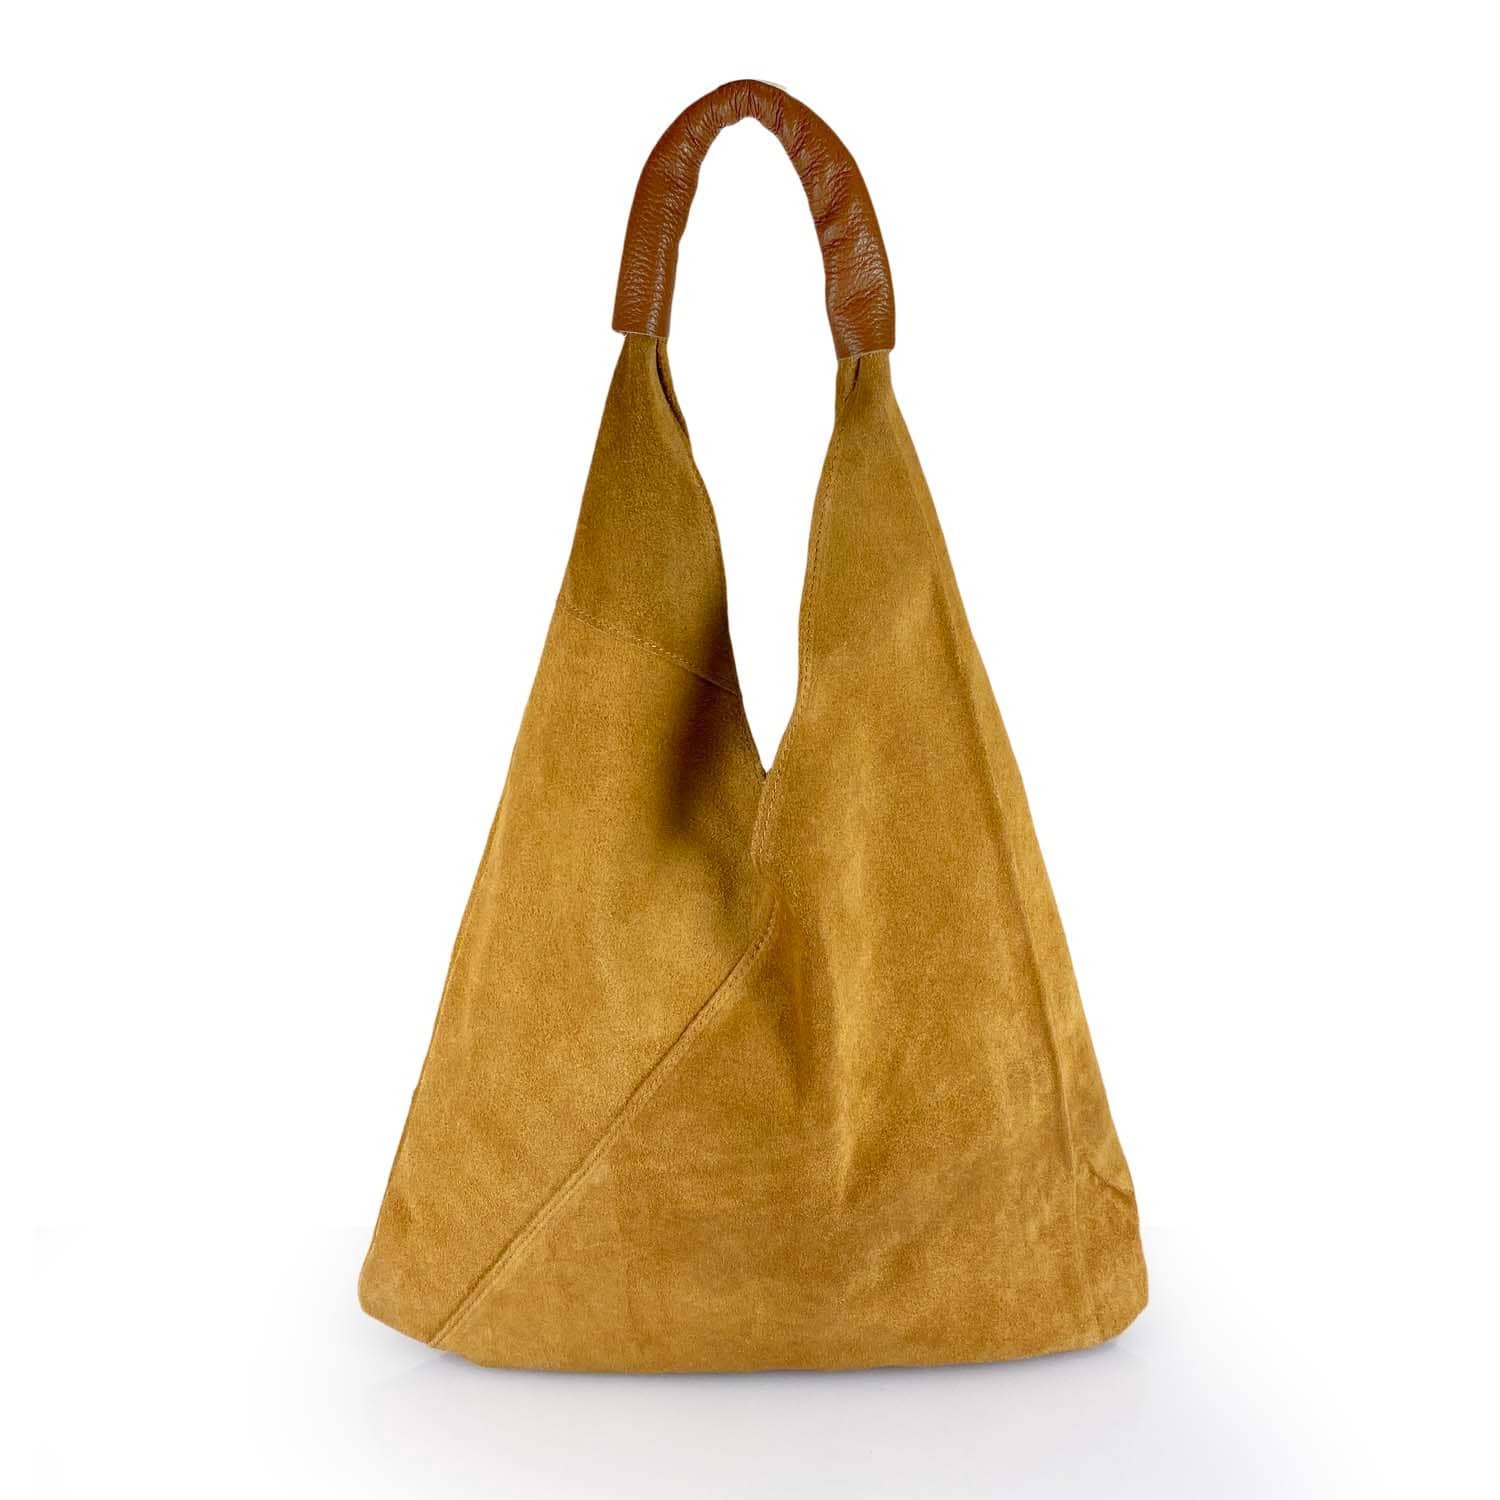 Genuine leather bag. made in Italy